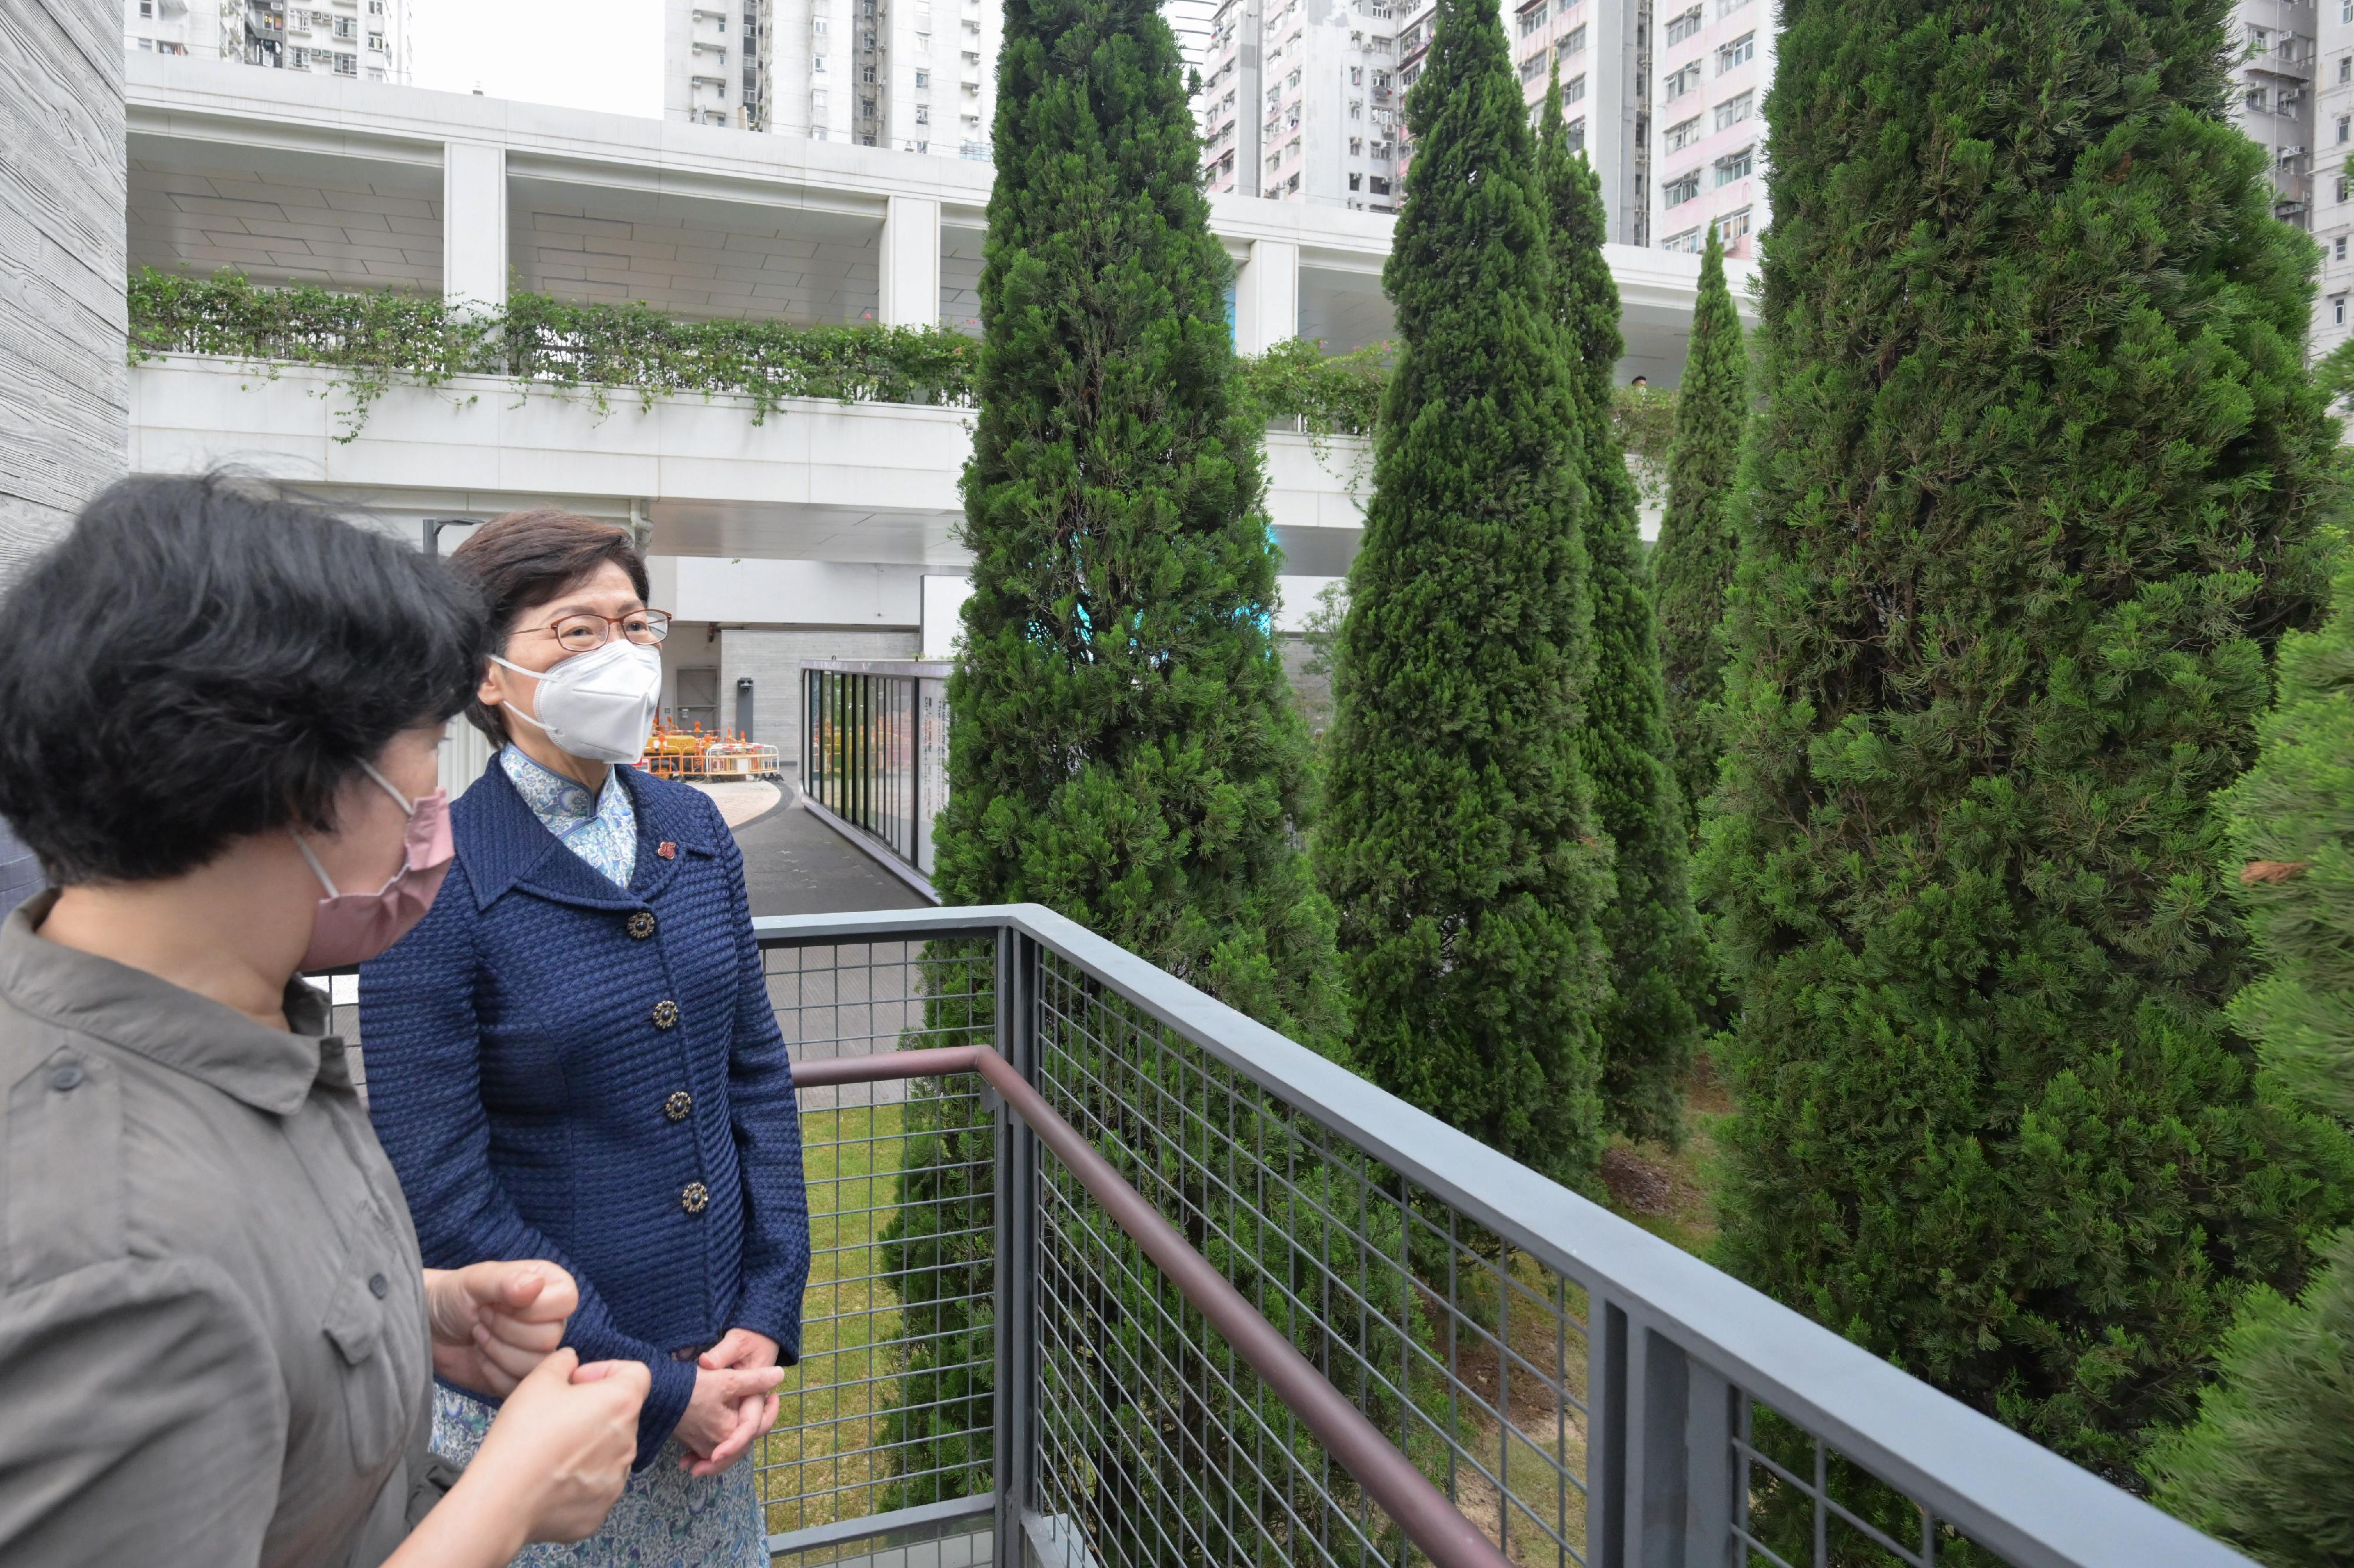 The Chief Executive, Mrs Carrie Lam, today (June 13) visited the new extension of the Oil Street Art Space in North Point. Photo shows Mrs Lam (right) viewing "Joyful Trees (Arbores Laetae)", an art installation to celebrate the 25th anniversary of the establishment of the Hong Kong Special Administrative Region.